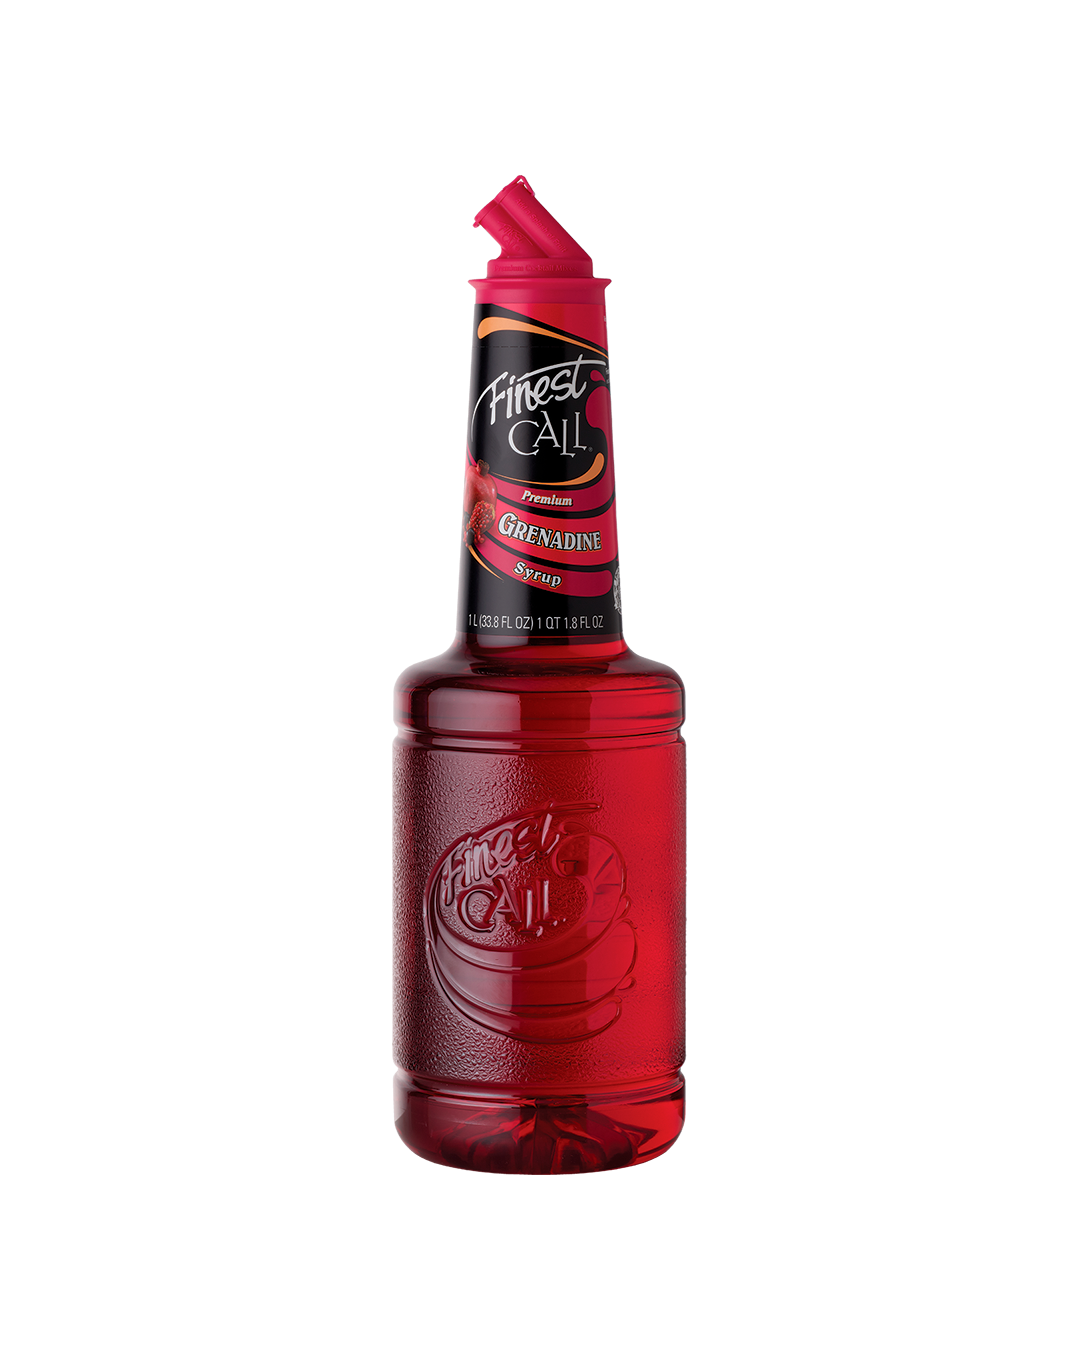 Finest Call Grenadine Syrup 1 Litre